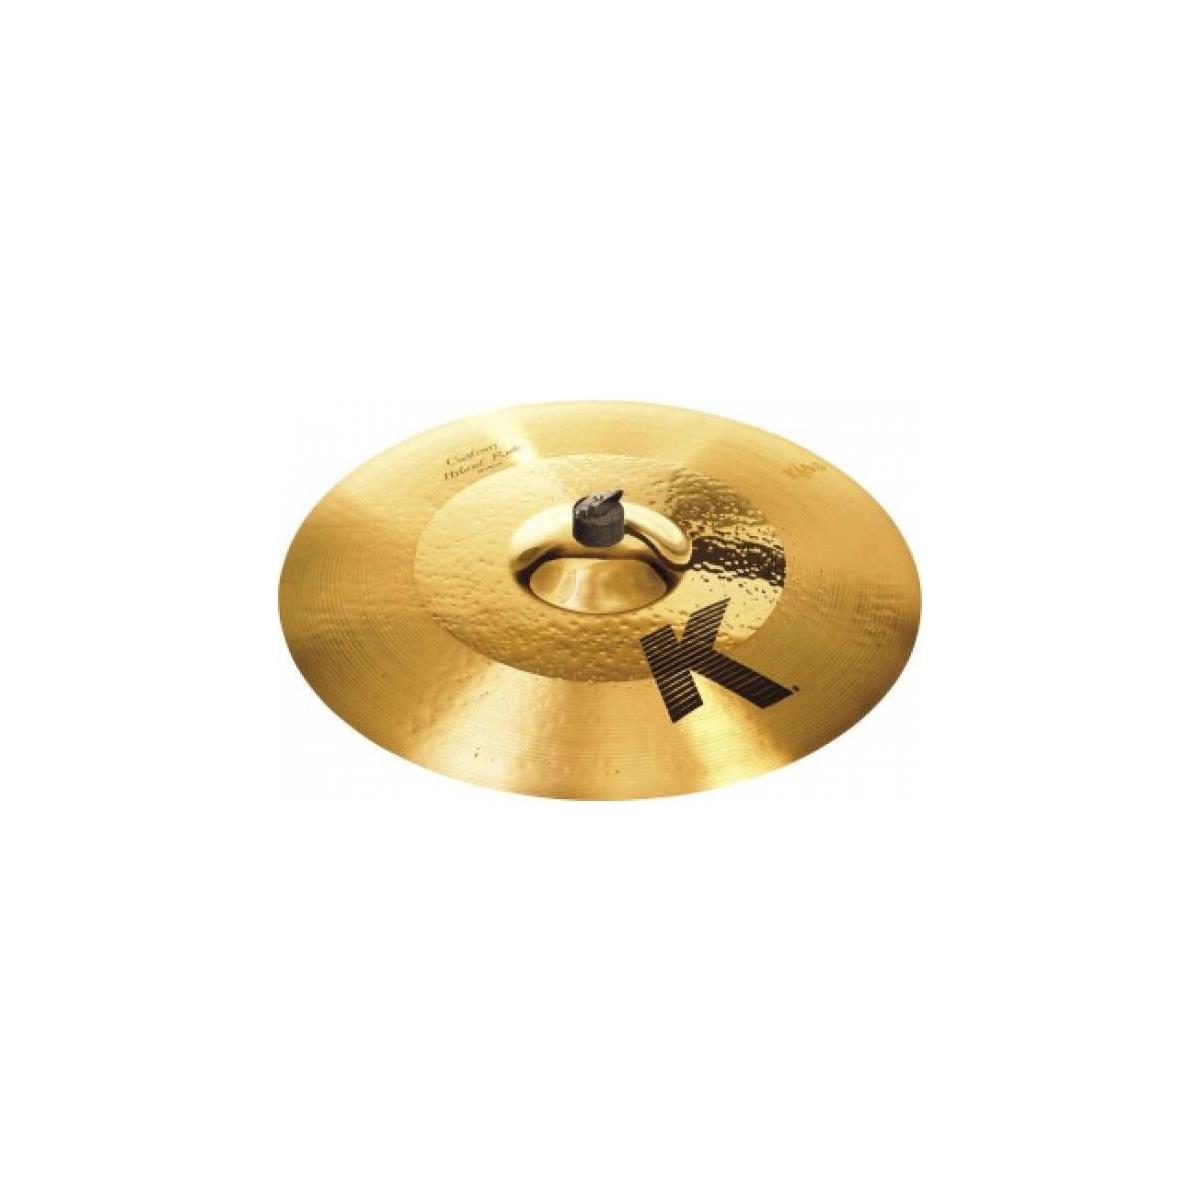 Zildjian 21" K Custom Hybrid Ride Cymbal The larger 21" size provides more projection and overtones than existing 20" size.Designed with one of Japan's top drummers, Akira Jimbo. The unlathed, buffed center provides defined stick attack and strong bell. Outside lathed edge increases spread and crashability.Drawing from the spirit of the legendary K Zildjian range, K Custom cymbals are dark, rich and dry and enable today's drummers to utilize complex K sounds in a more modern musical environment. They feature traditional K hammering, plus a variety of additional modern hammering techniques that produce unique sonic capabilities. Recommended for modern jazz, studio, country and medium rock. K Customs are designed with today's diverse music scene in mind.